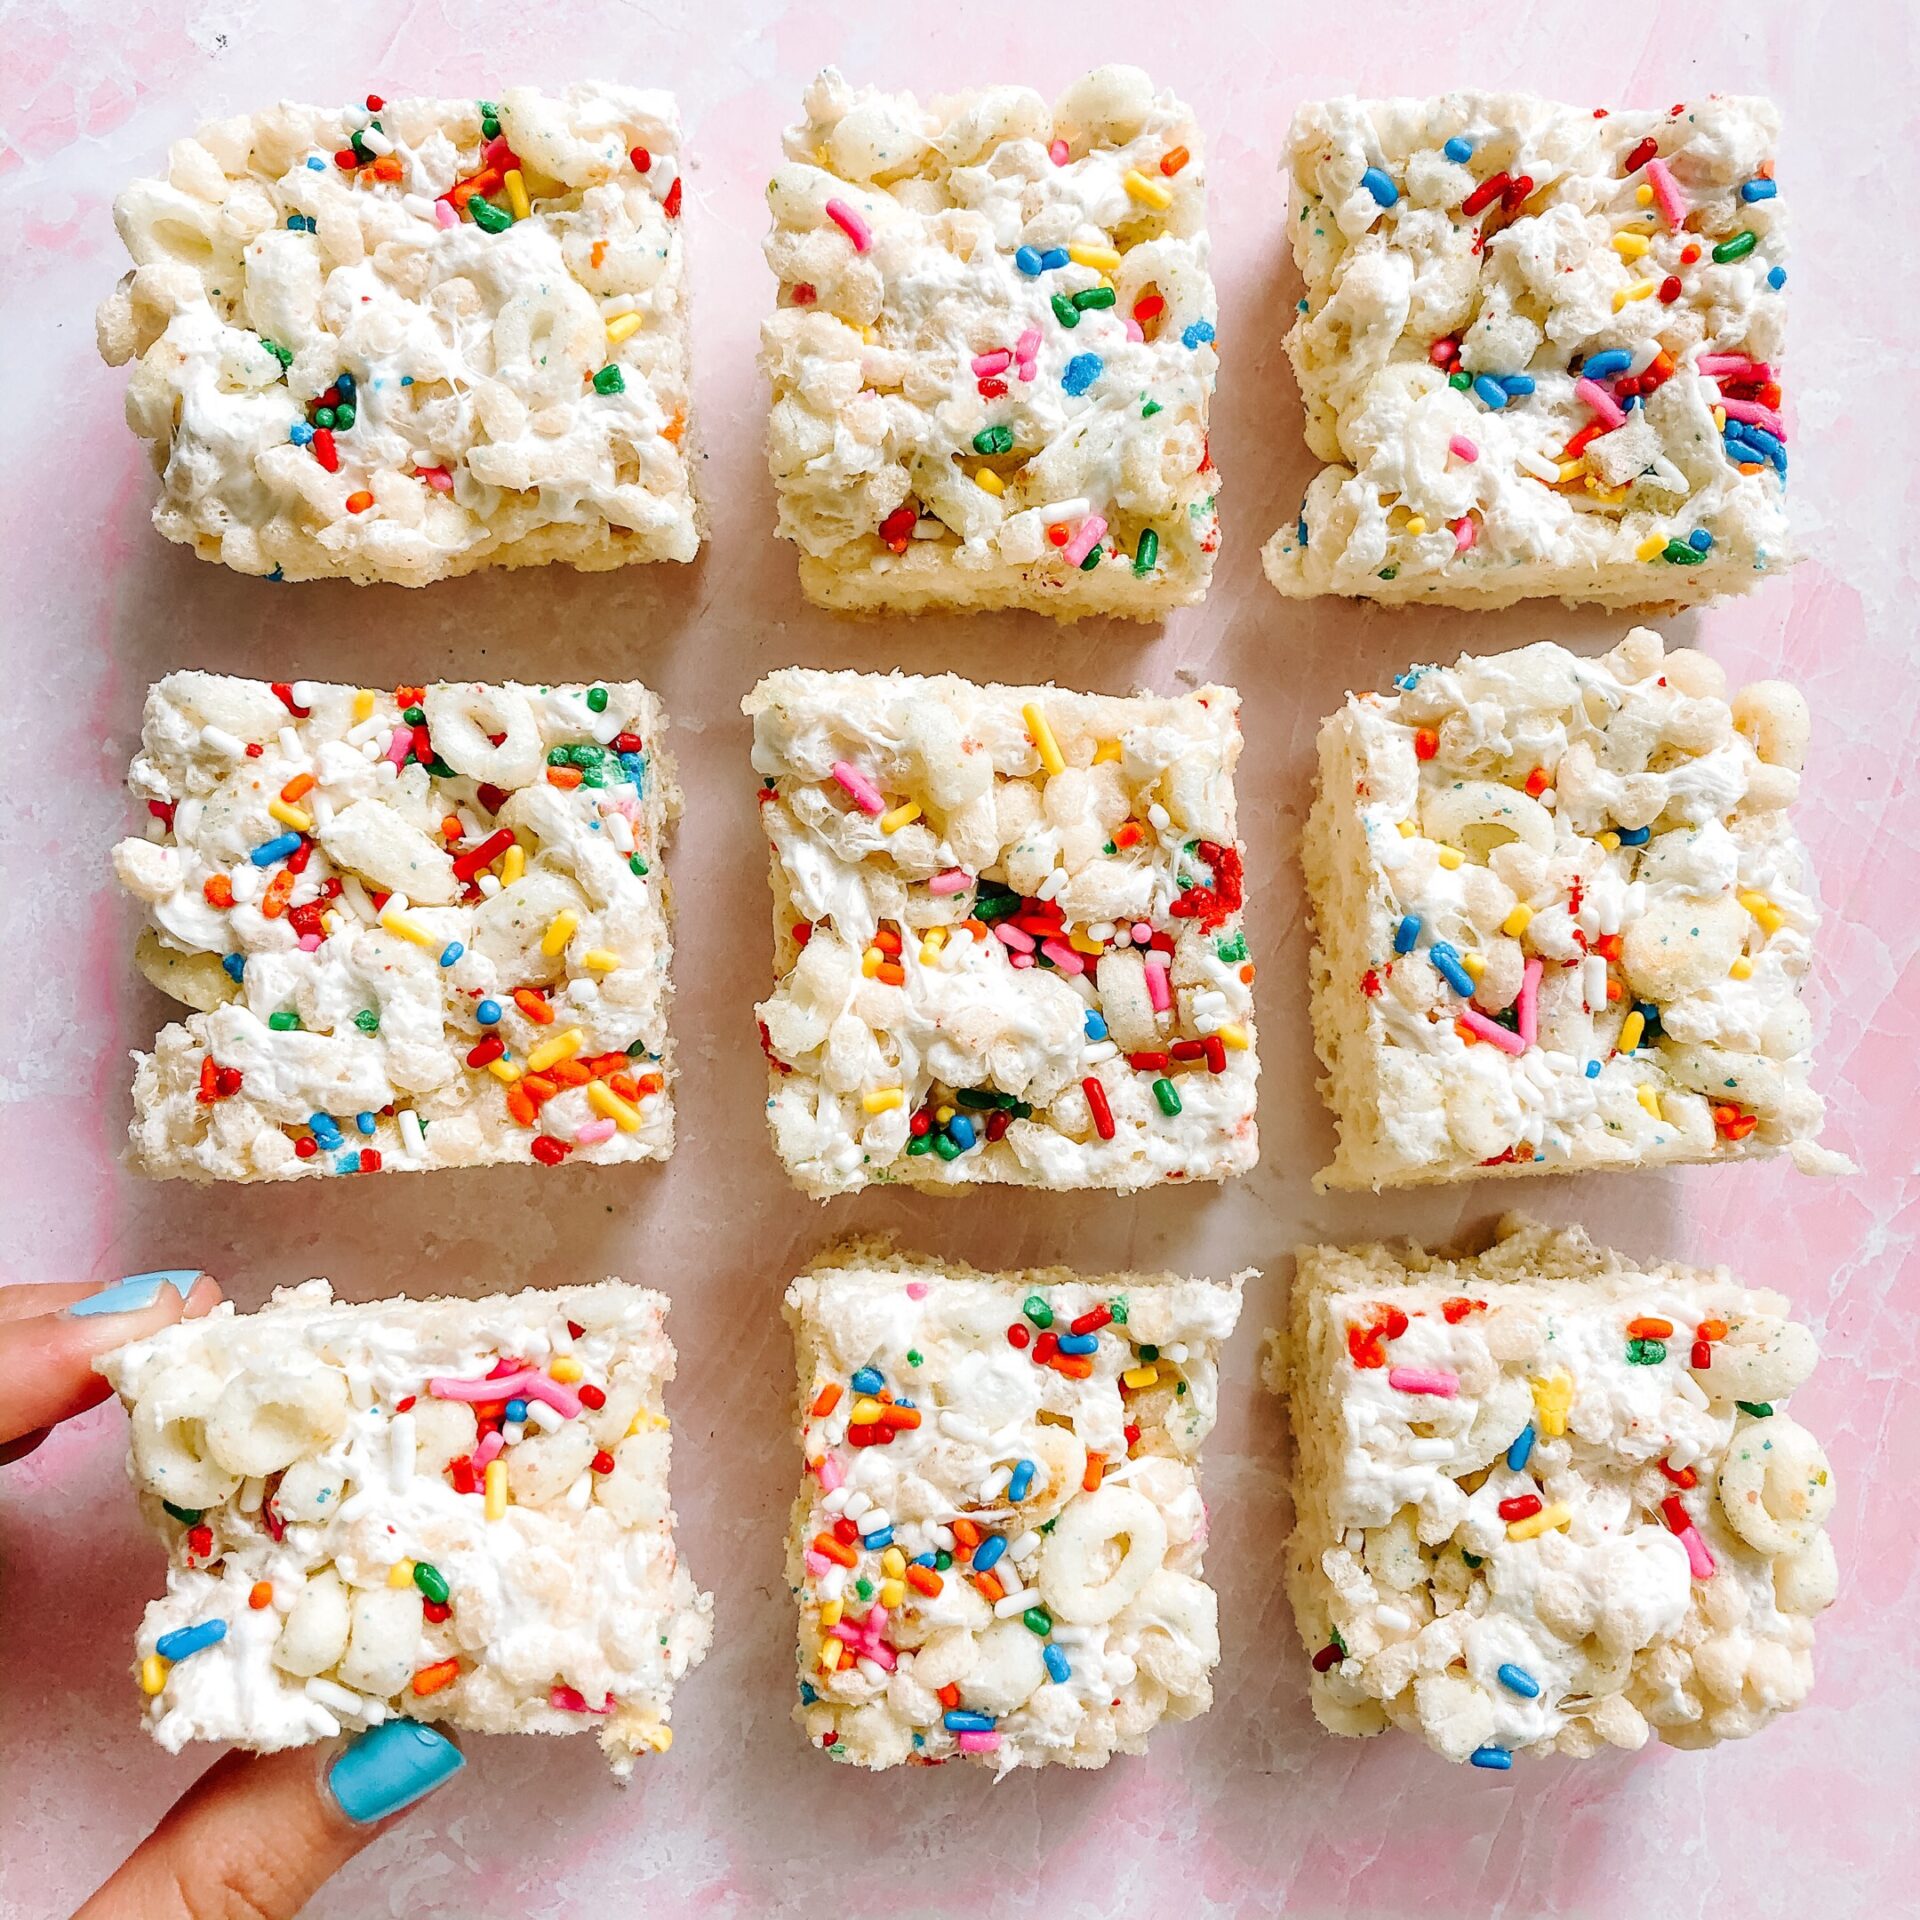 How to Turn Your Favorite Cereal into a “Krispy Treat”